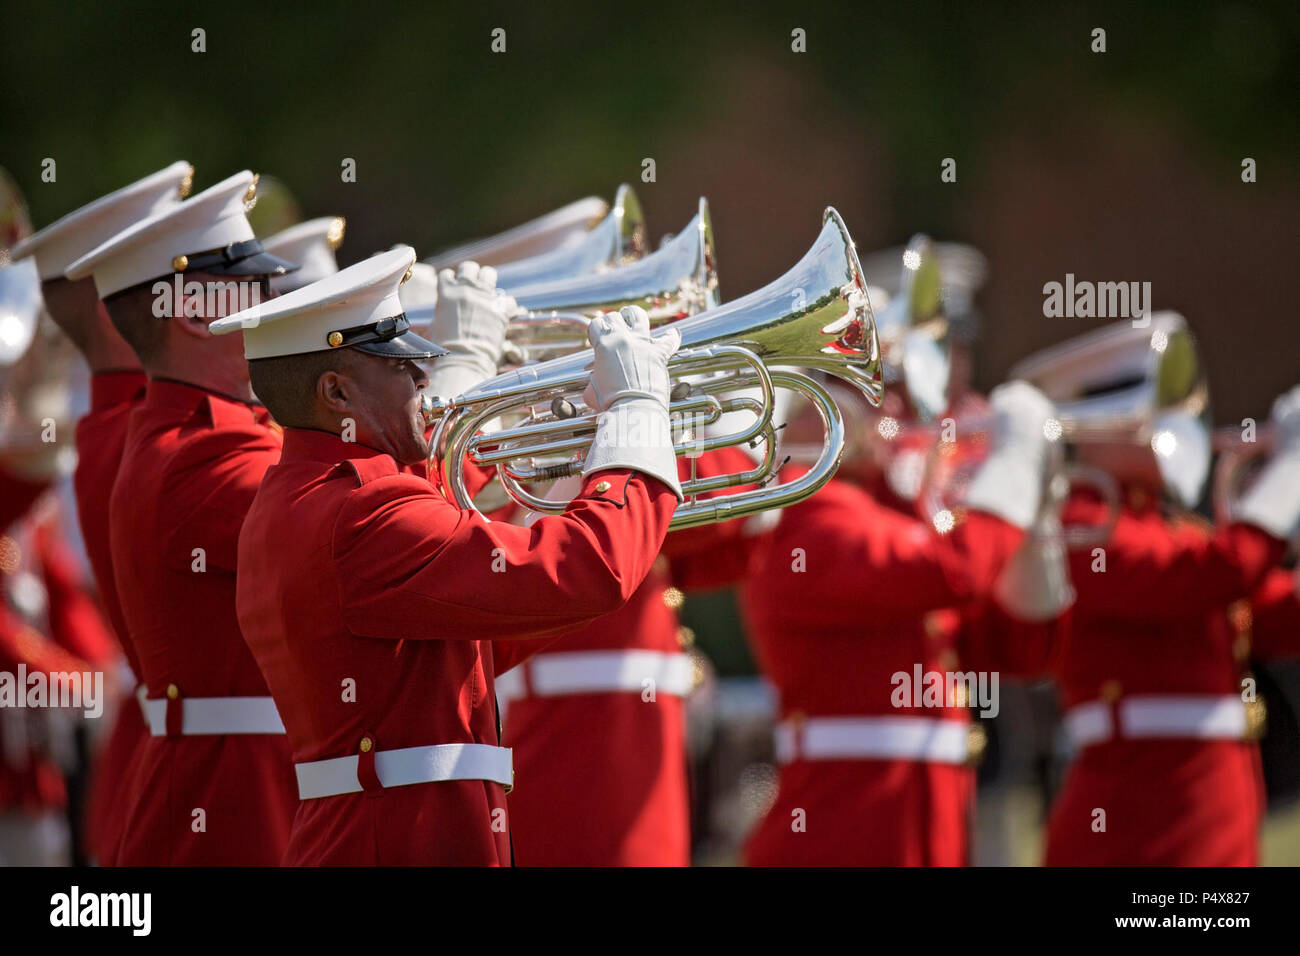 Members of the U.S. Marine Drum & Bugle Corps perform during the Centennial Celebration Ceremony at Lejeune Field, Marine Corps Base (MCB) Quantico, Va., May 10, 2017. The event commemorates the founding of MCB Quantico in 1917, and consisted of performances by the U.S. Marine Corps Silent Drill Platoon and the U.S. Marine Drum & Bugle Corps. Stock Photo